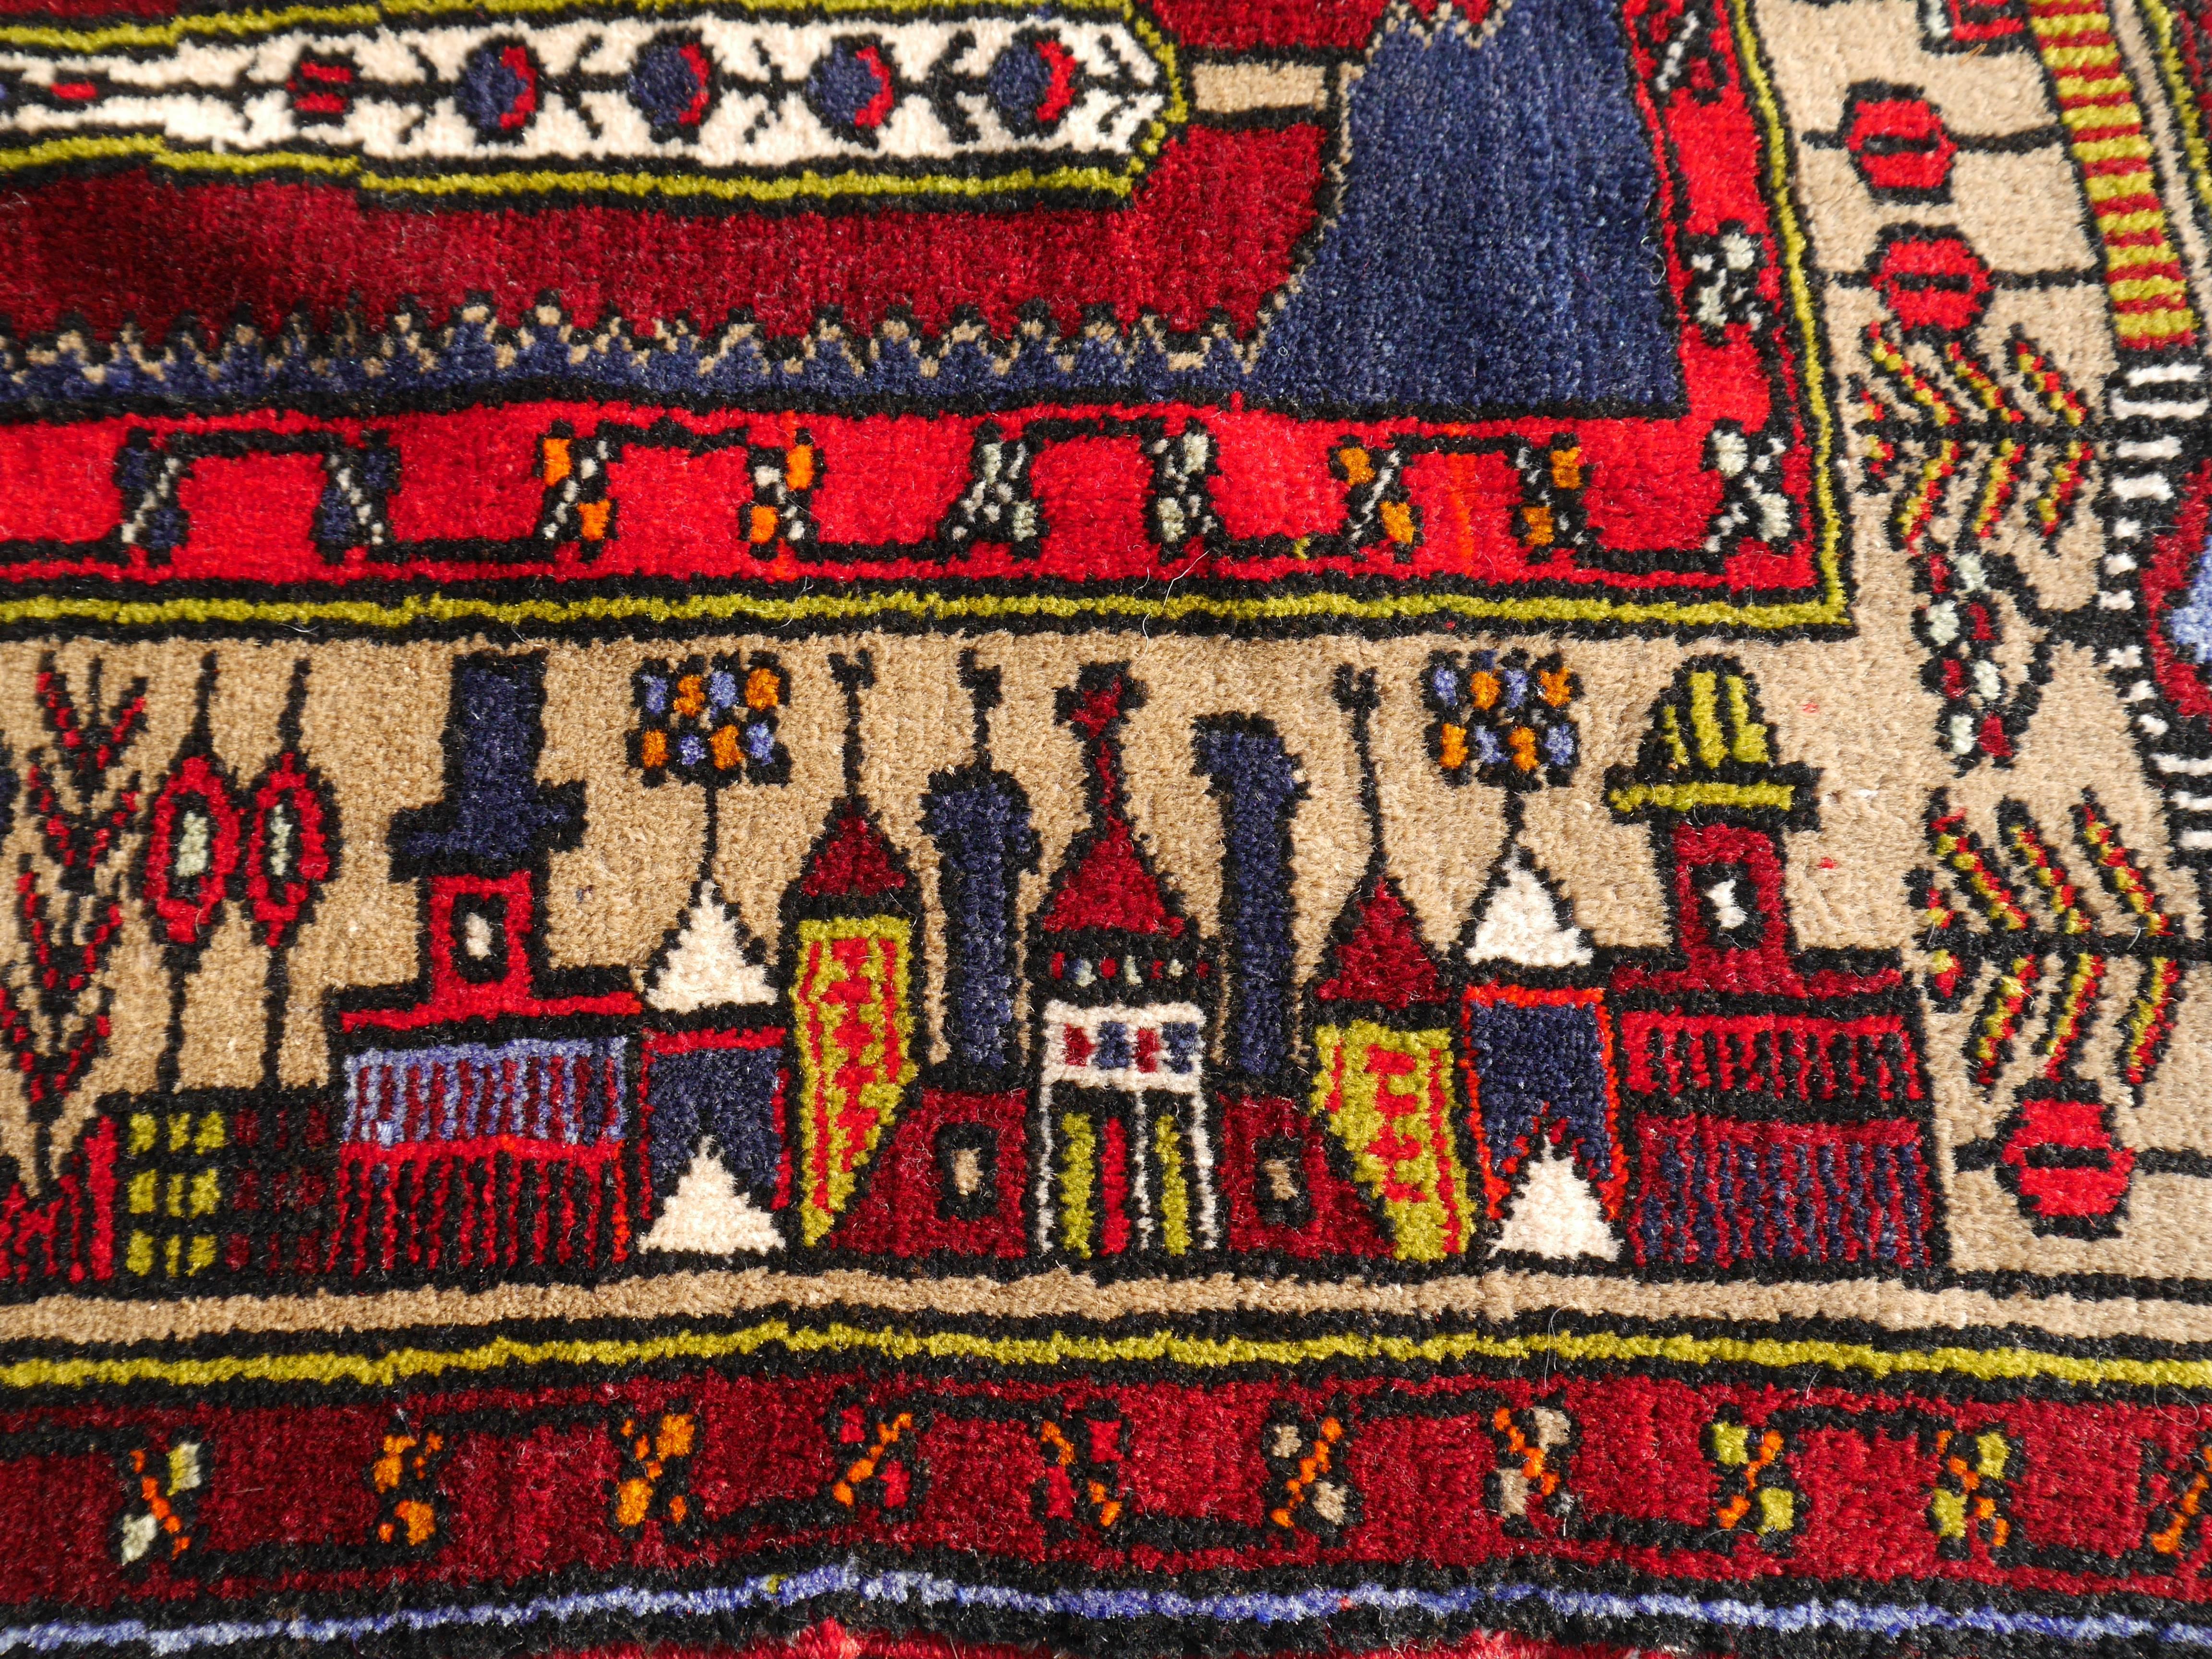 Beautiful and unusual small village rug from Turkey. This type of rug is described as wedding rug since there are young women who make pieces with the buildings of her home village. She can take 